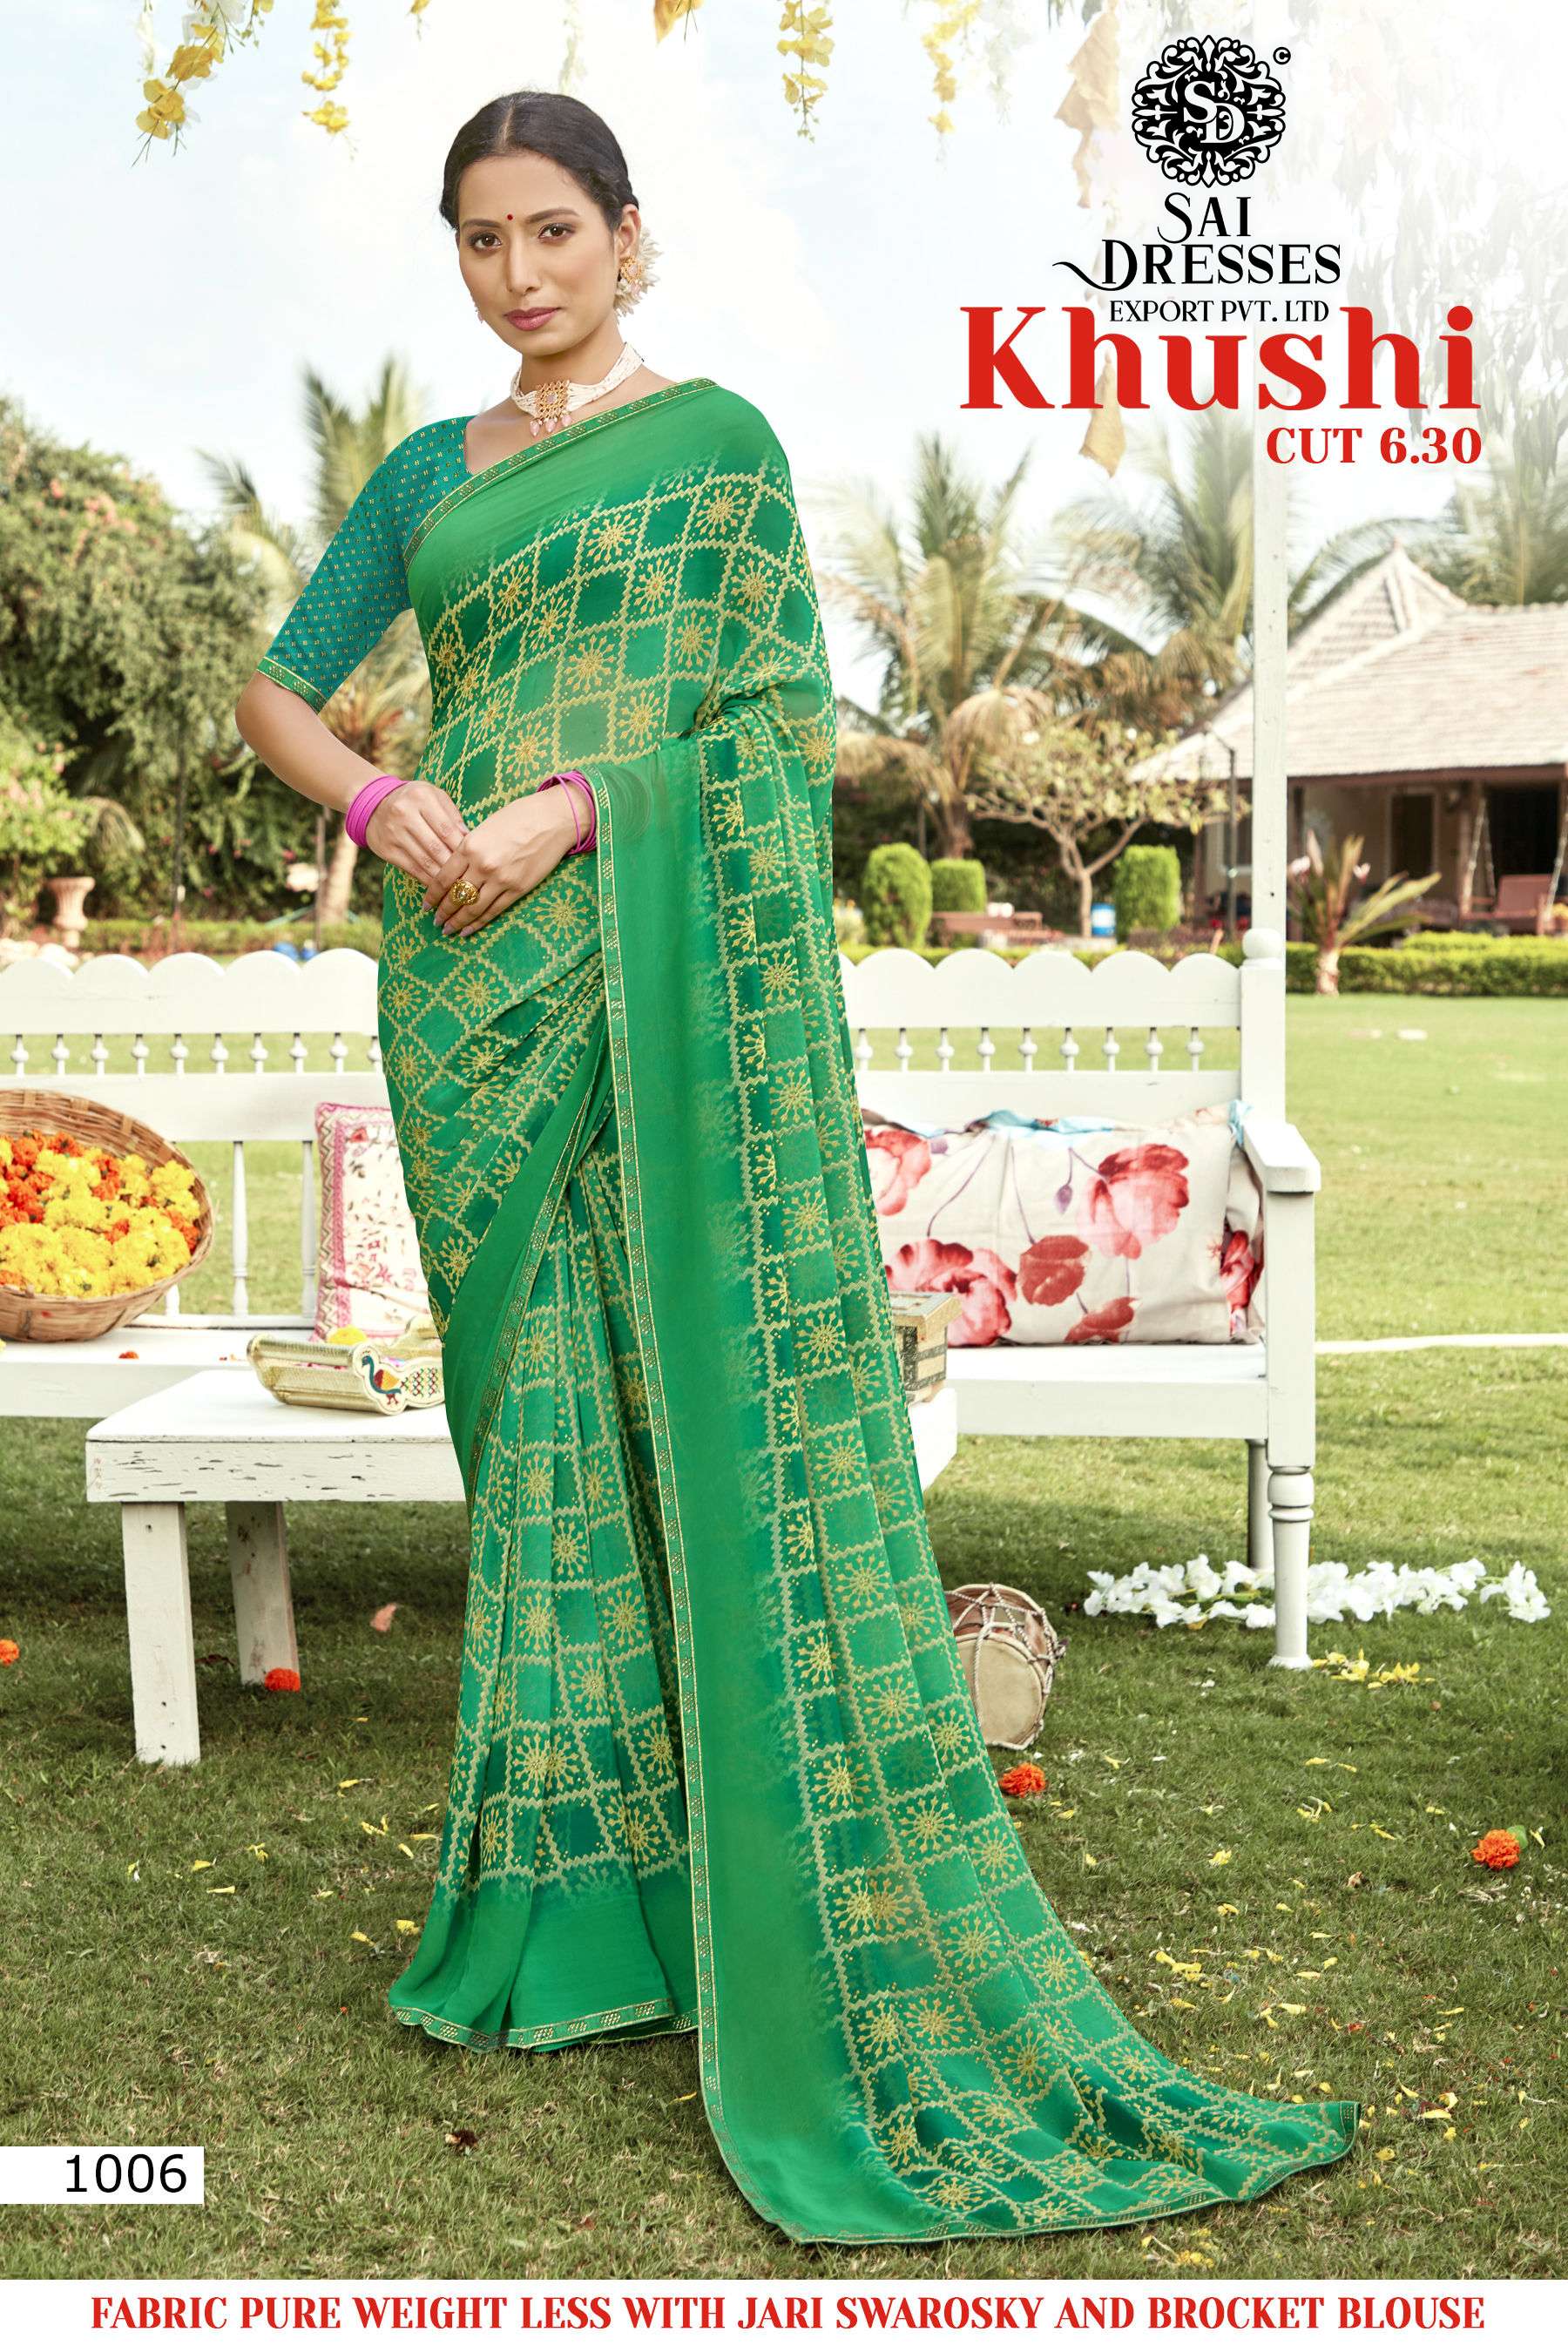 SAI DRESSES PRESENT KHUSHI DAILY WEAR PURE WEIGHT LESS JARI SWAROSKY SAREE WITH BROCKET BLOUSE IN WHOLESALE RATE IN SURAT